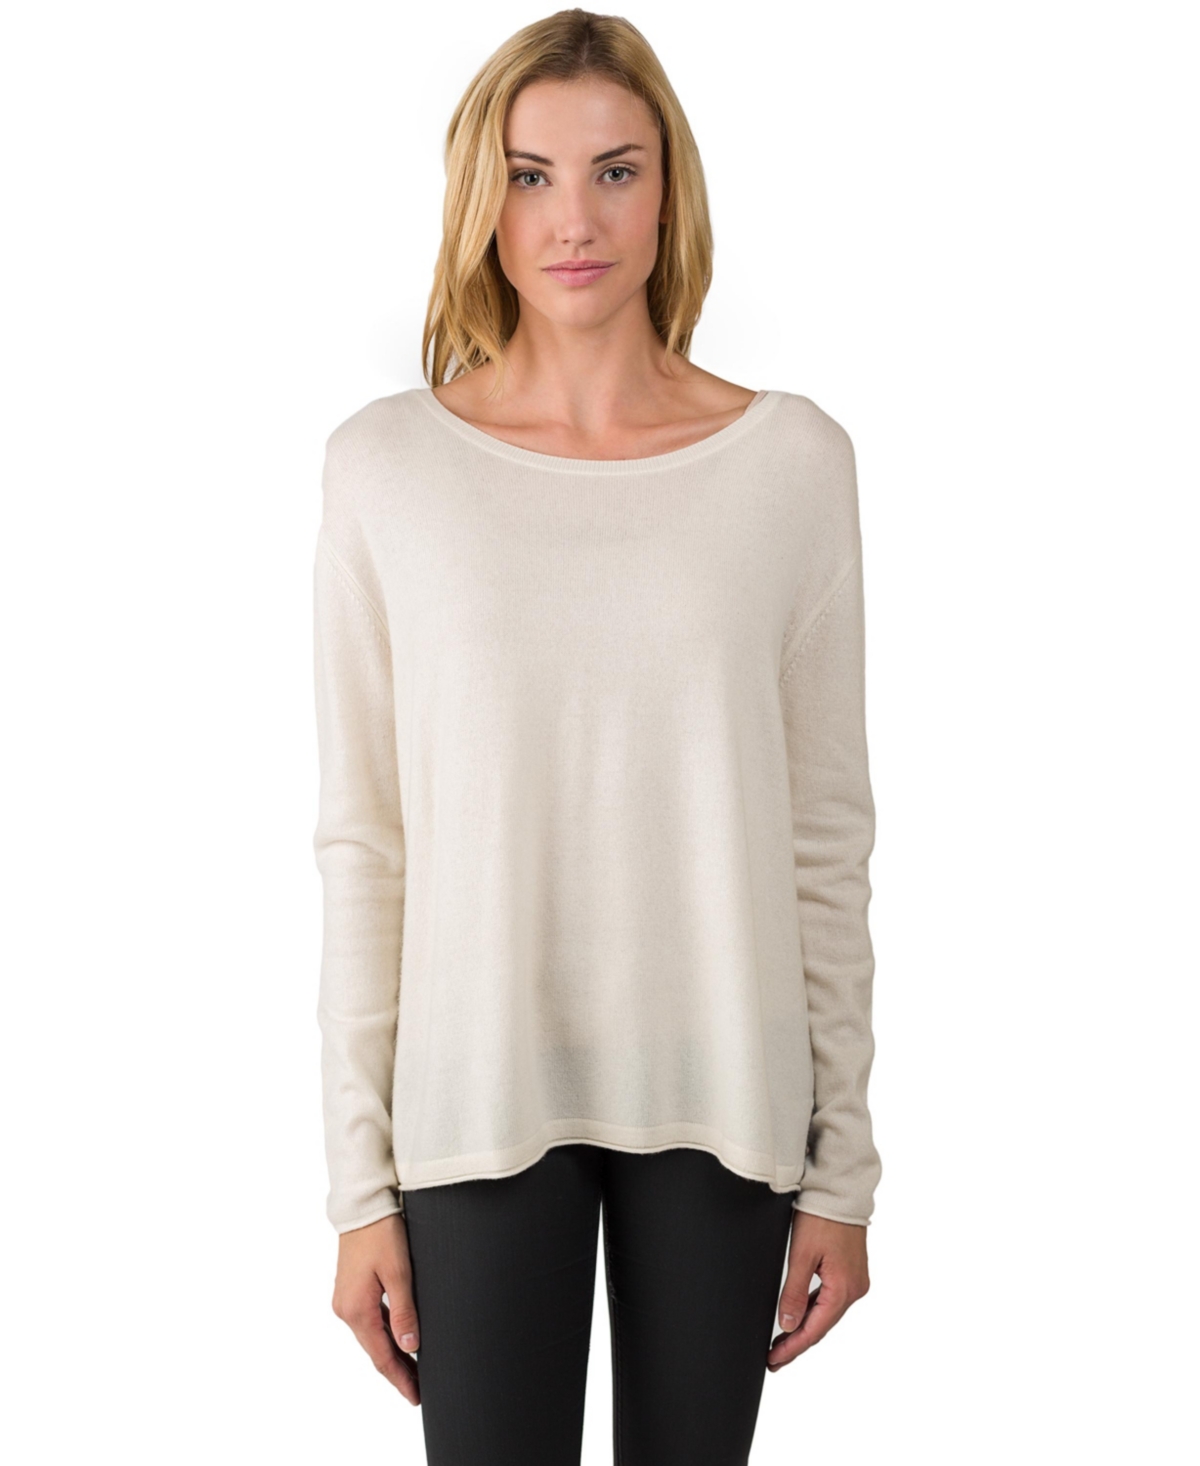 Women's J Cashmere 100% Cashmere Dolman Sleeve Pullover High Low Sweater - Cream